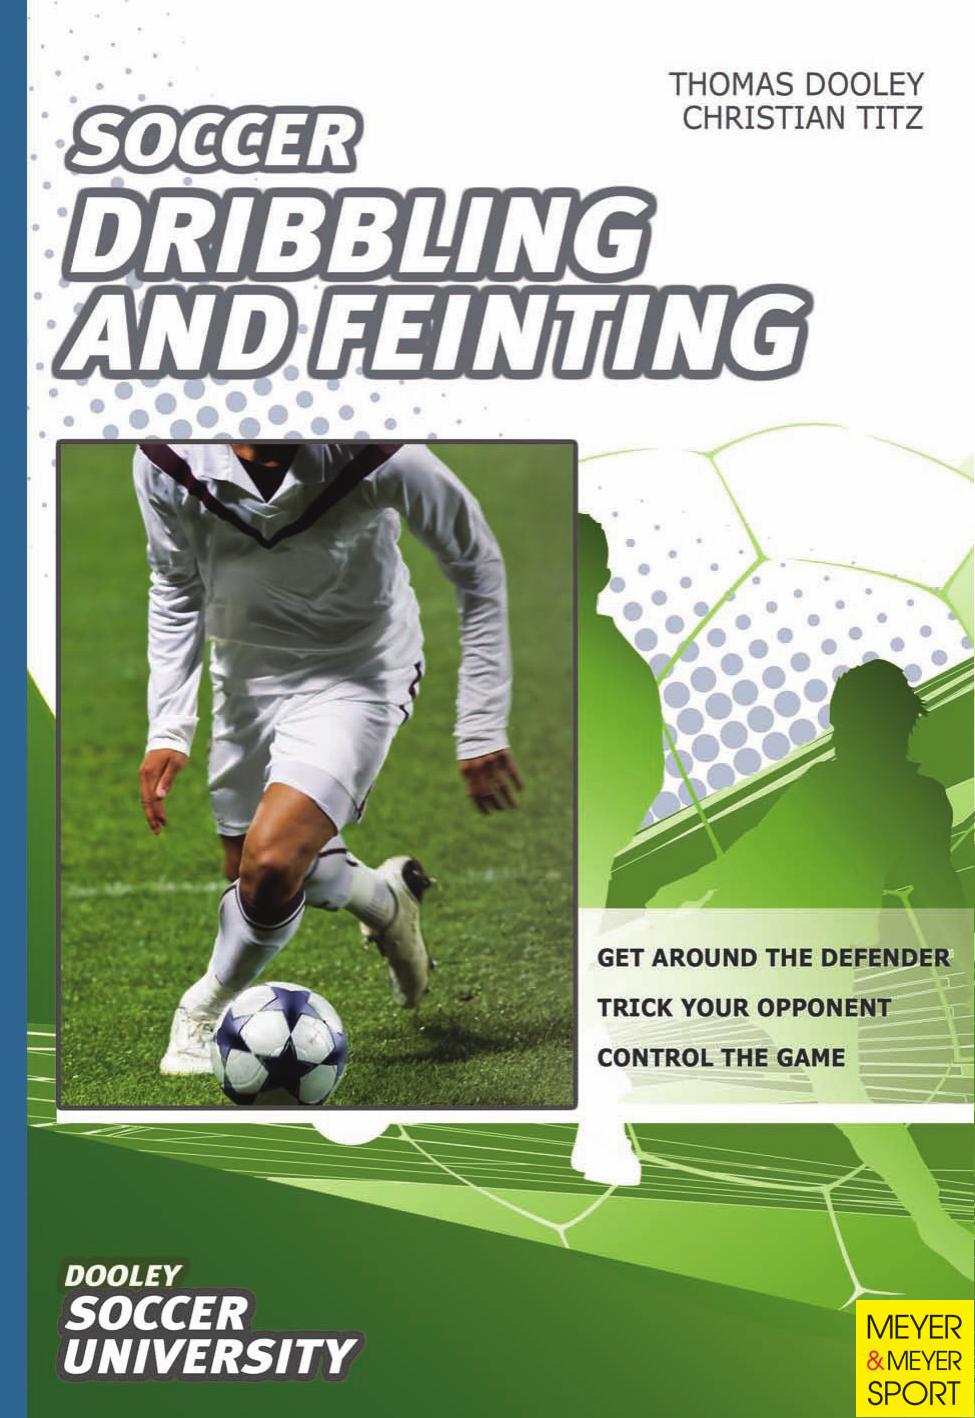 Soccer--dribbling and Feinting by Dooley Thomas. Titz Christian